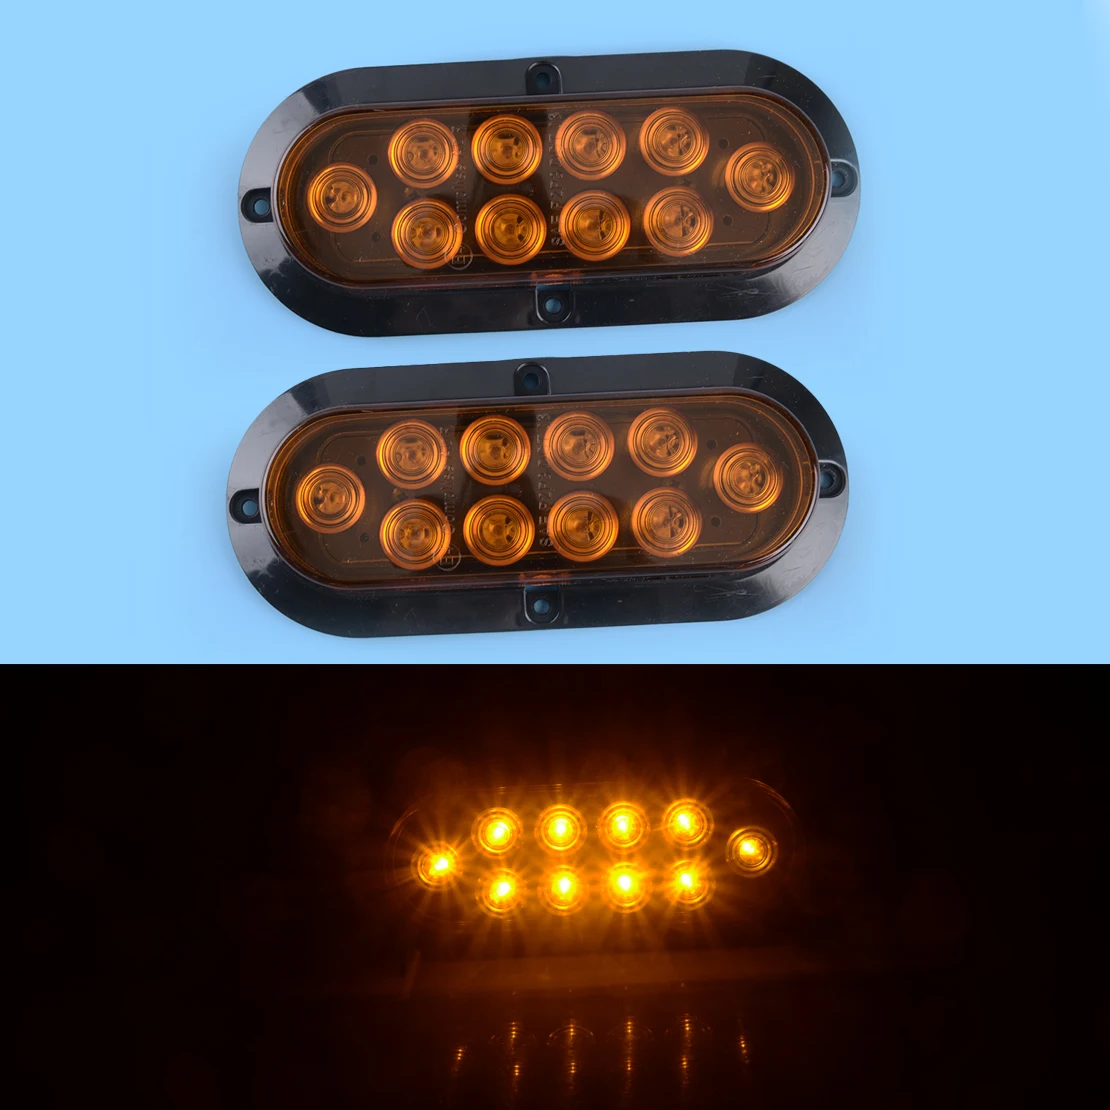 

2Pcs 10LED Oval Stop Turn Signal Tail Backup Reverse Brake Light Fit for Truck Trailer Cargo Tractors Bus Amber 12V DC